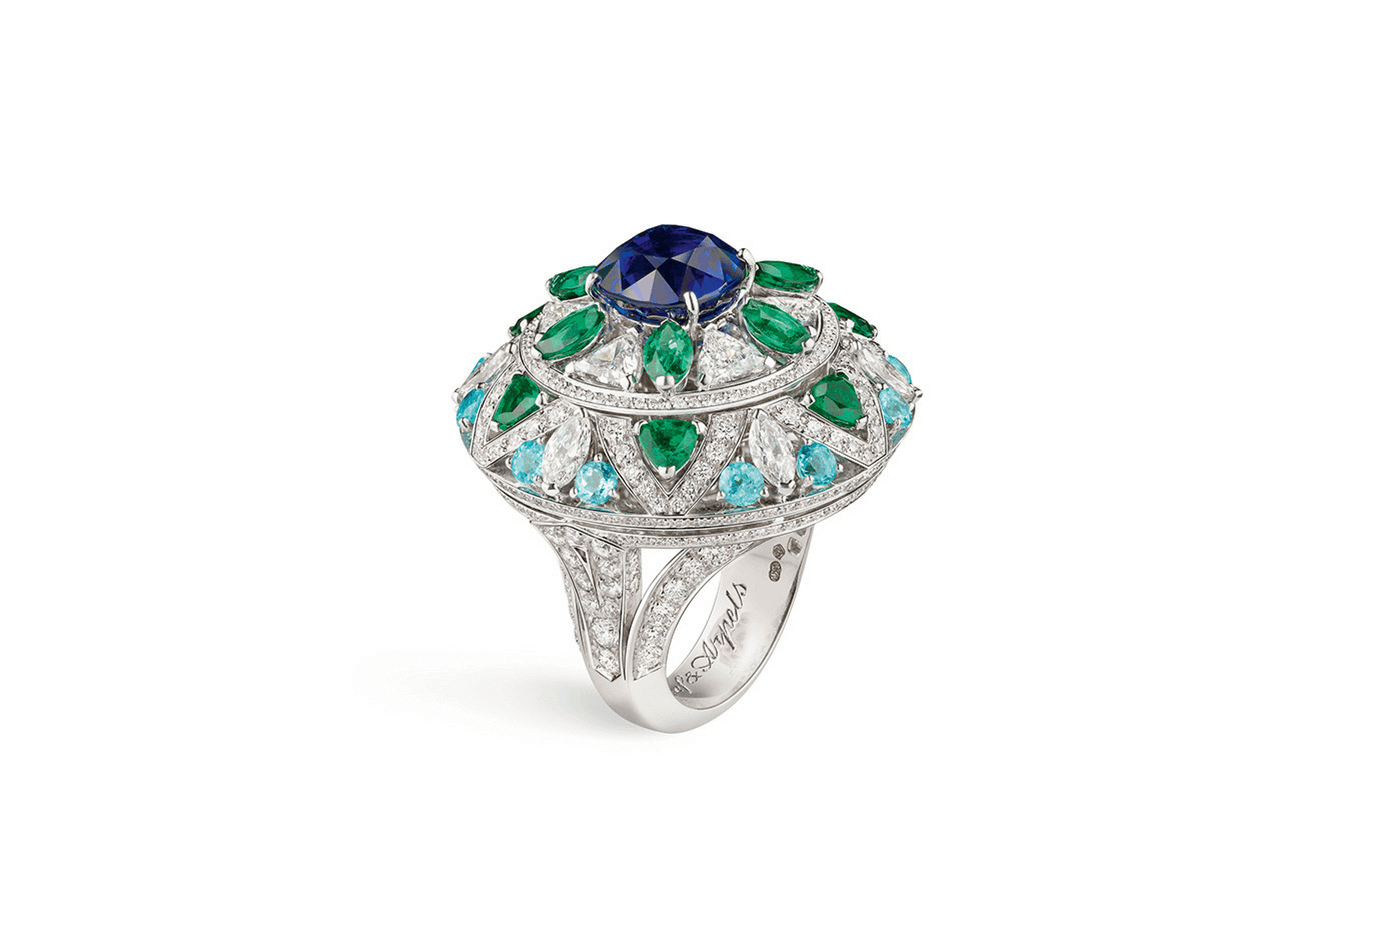 Fleur Bleu ring with white gold, diamonds, emeralds, tourmalines and a cushion-cut sapphire from Van Cleef & Arpels. Photo courtesy: Richmont